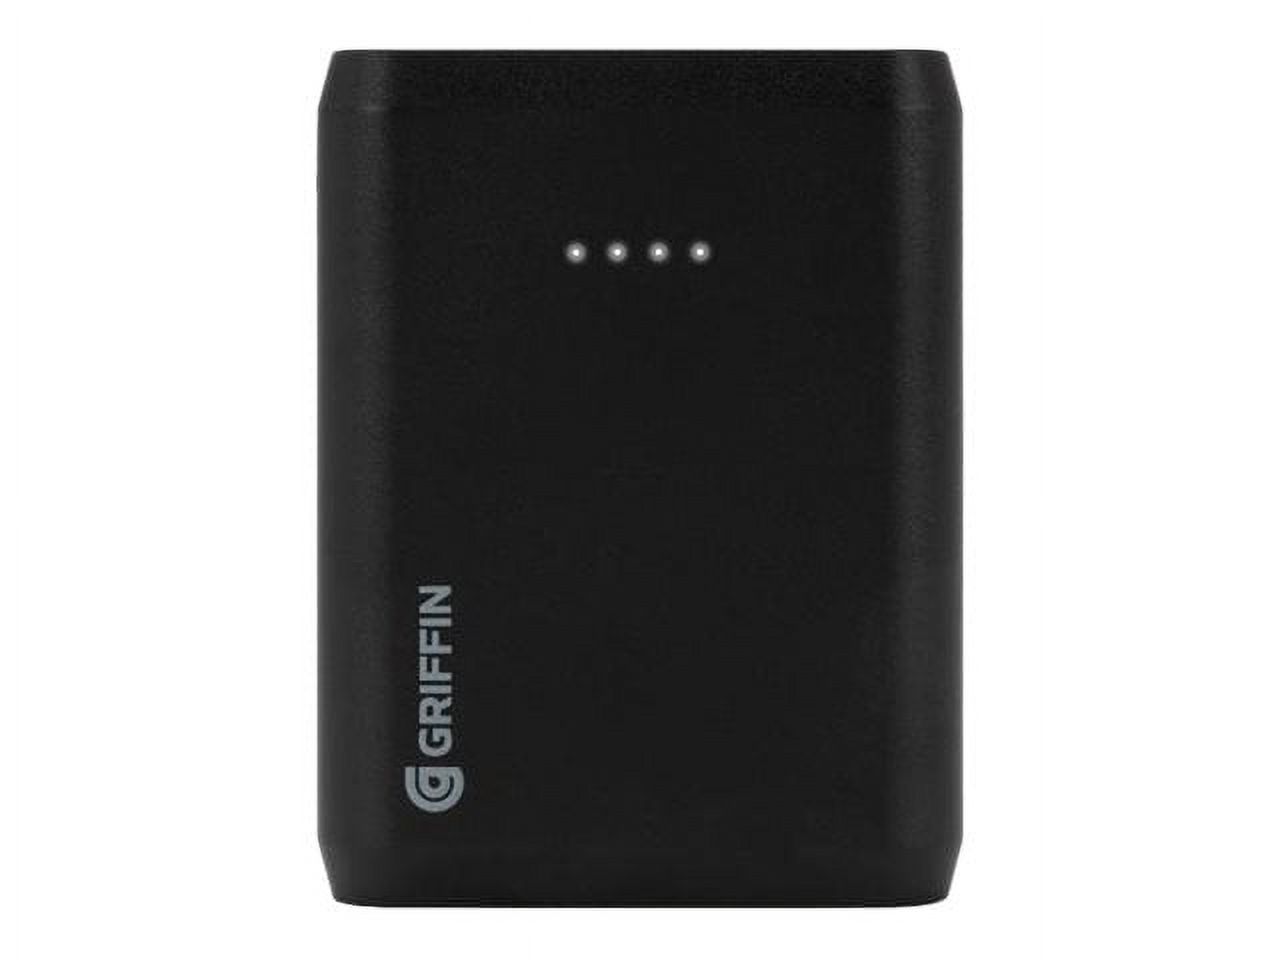 Griffin Reserve Power Bank, 6000mAh, Black - image 2 of 4